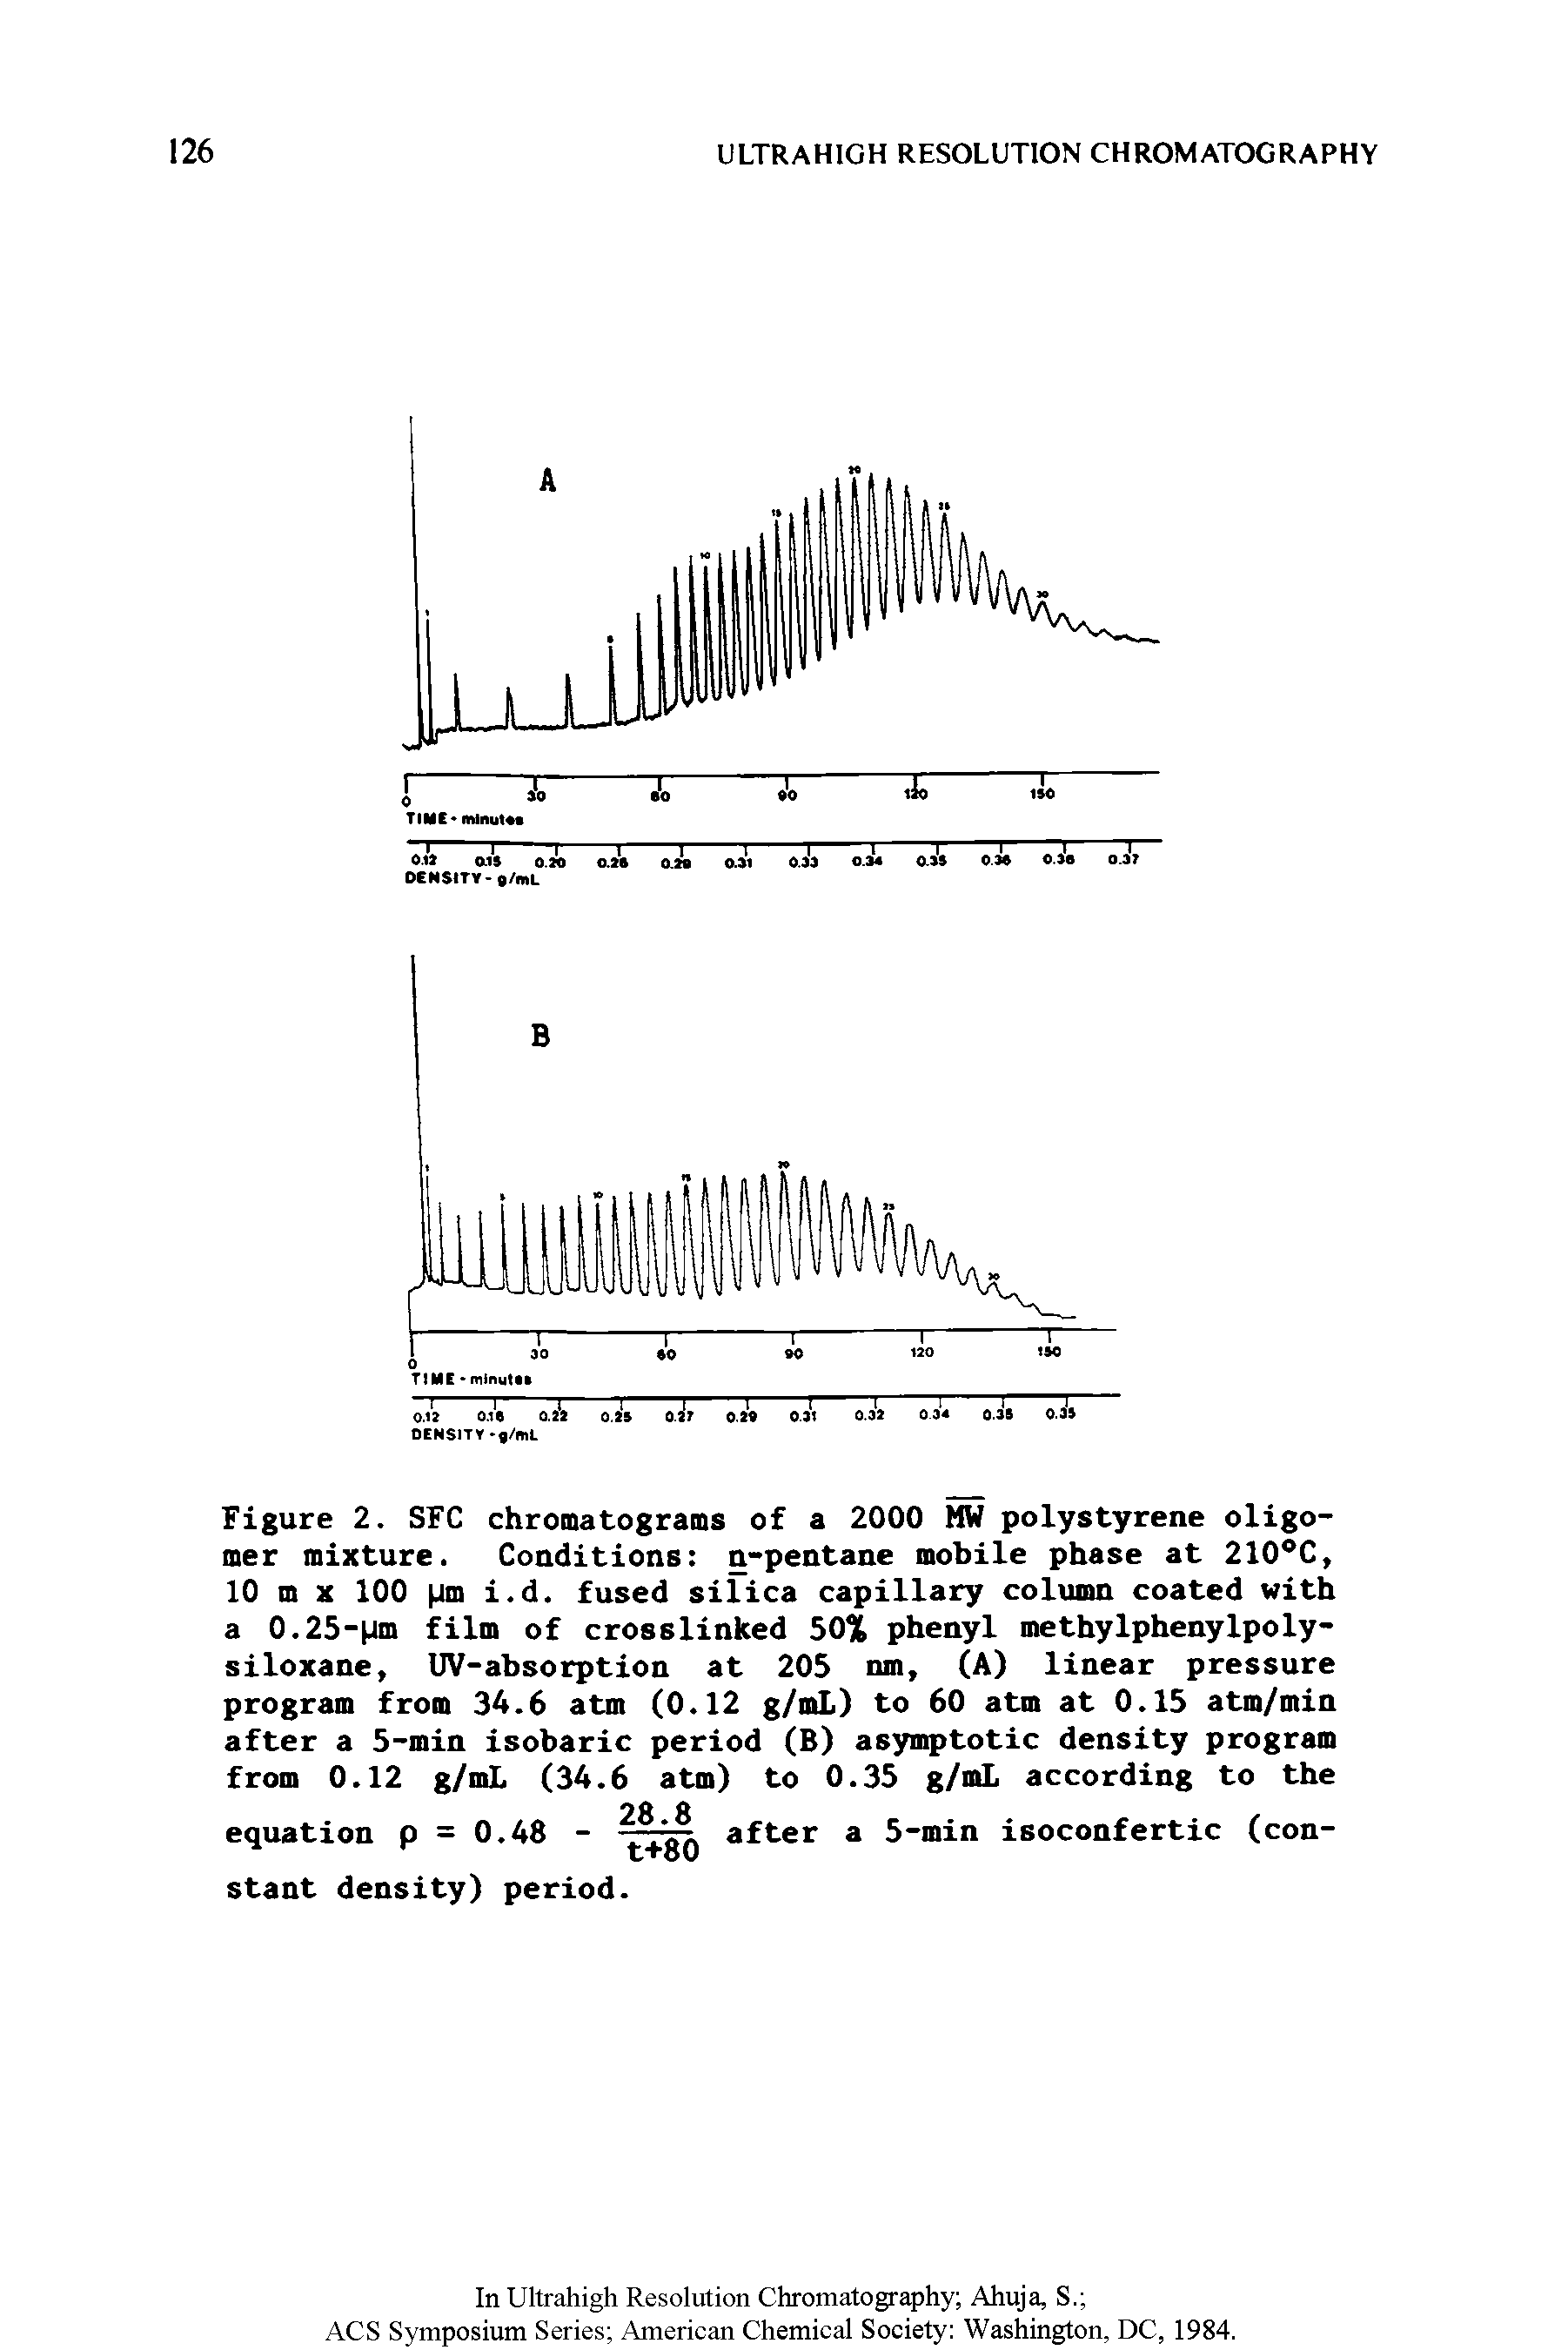 Figure 2. SFC chromatograms of a 2000 MW polystyrene oligomer mixture. Conditions n-pentane mobile phase at 210 C, 10 m X 100 Ji fused silica capillary column coated with a 0.25- Jm film of crosslinked 50% phenyl metbylphenylpoly-siloxane, UV-absorption at 205 nm, (A) linear pressure program from 34.6 atm (0.12 g/mL) to 60 atm at 0.15 atm/min after a 5-min isobaric period (B) asyoiptotic density program from 0.12 g/mL (34.6 atm) to 0.35 g/siL according to the...